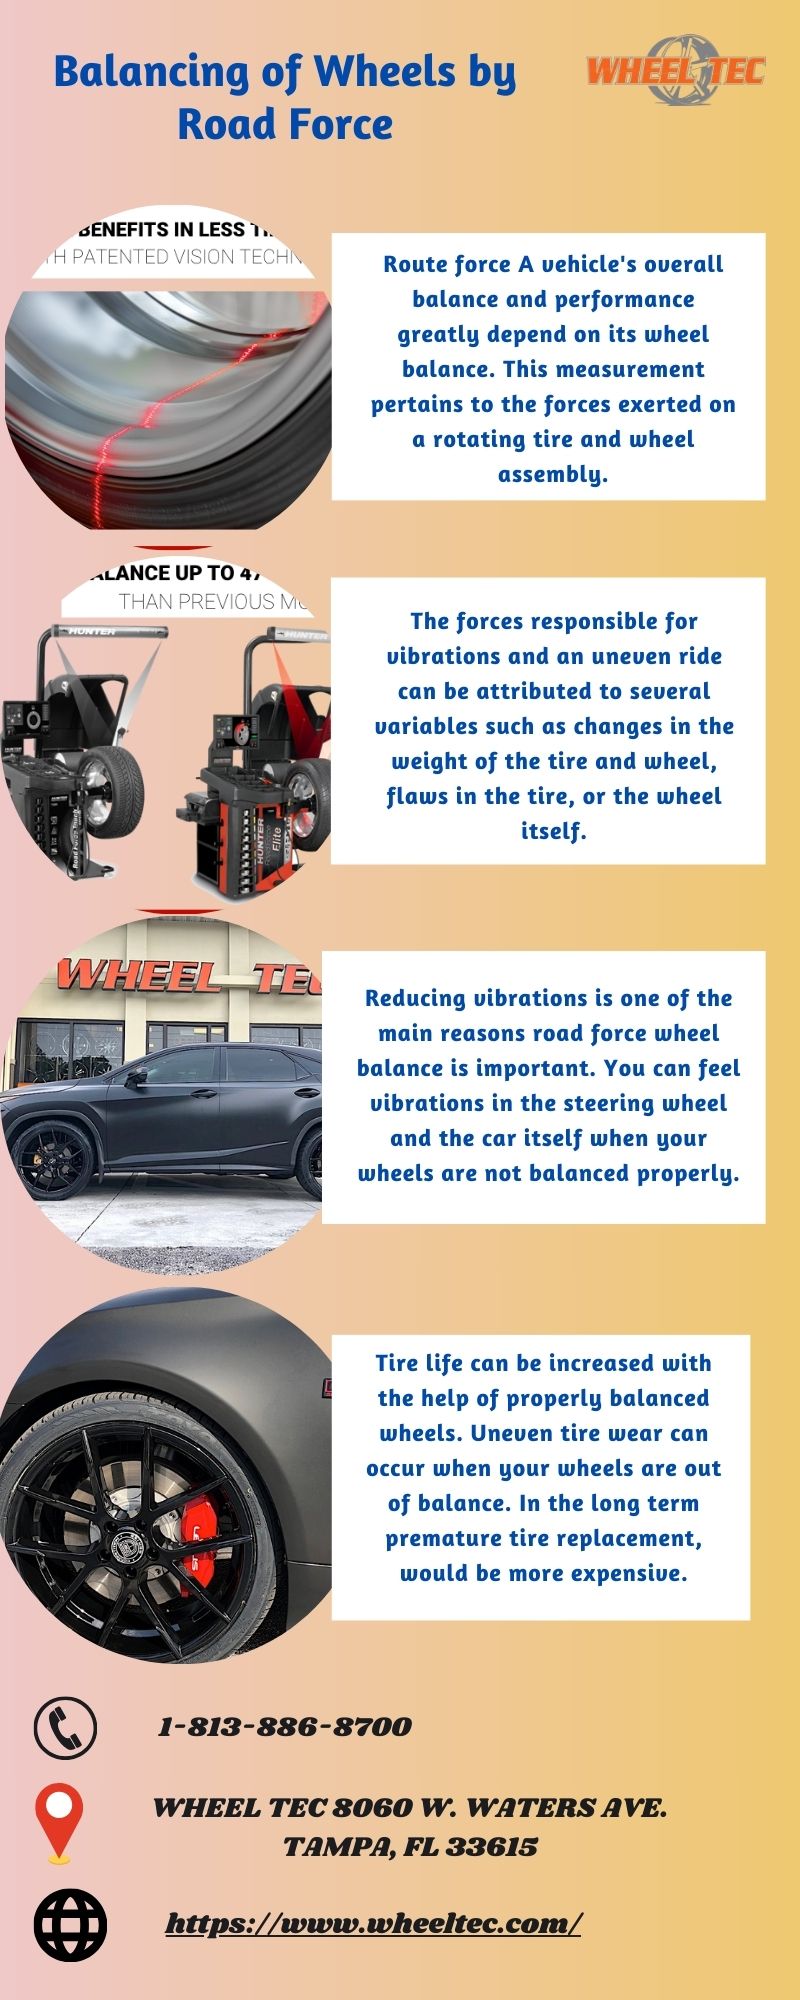 Why Is Wheel Balancing Important for Reducing Vibrations?  